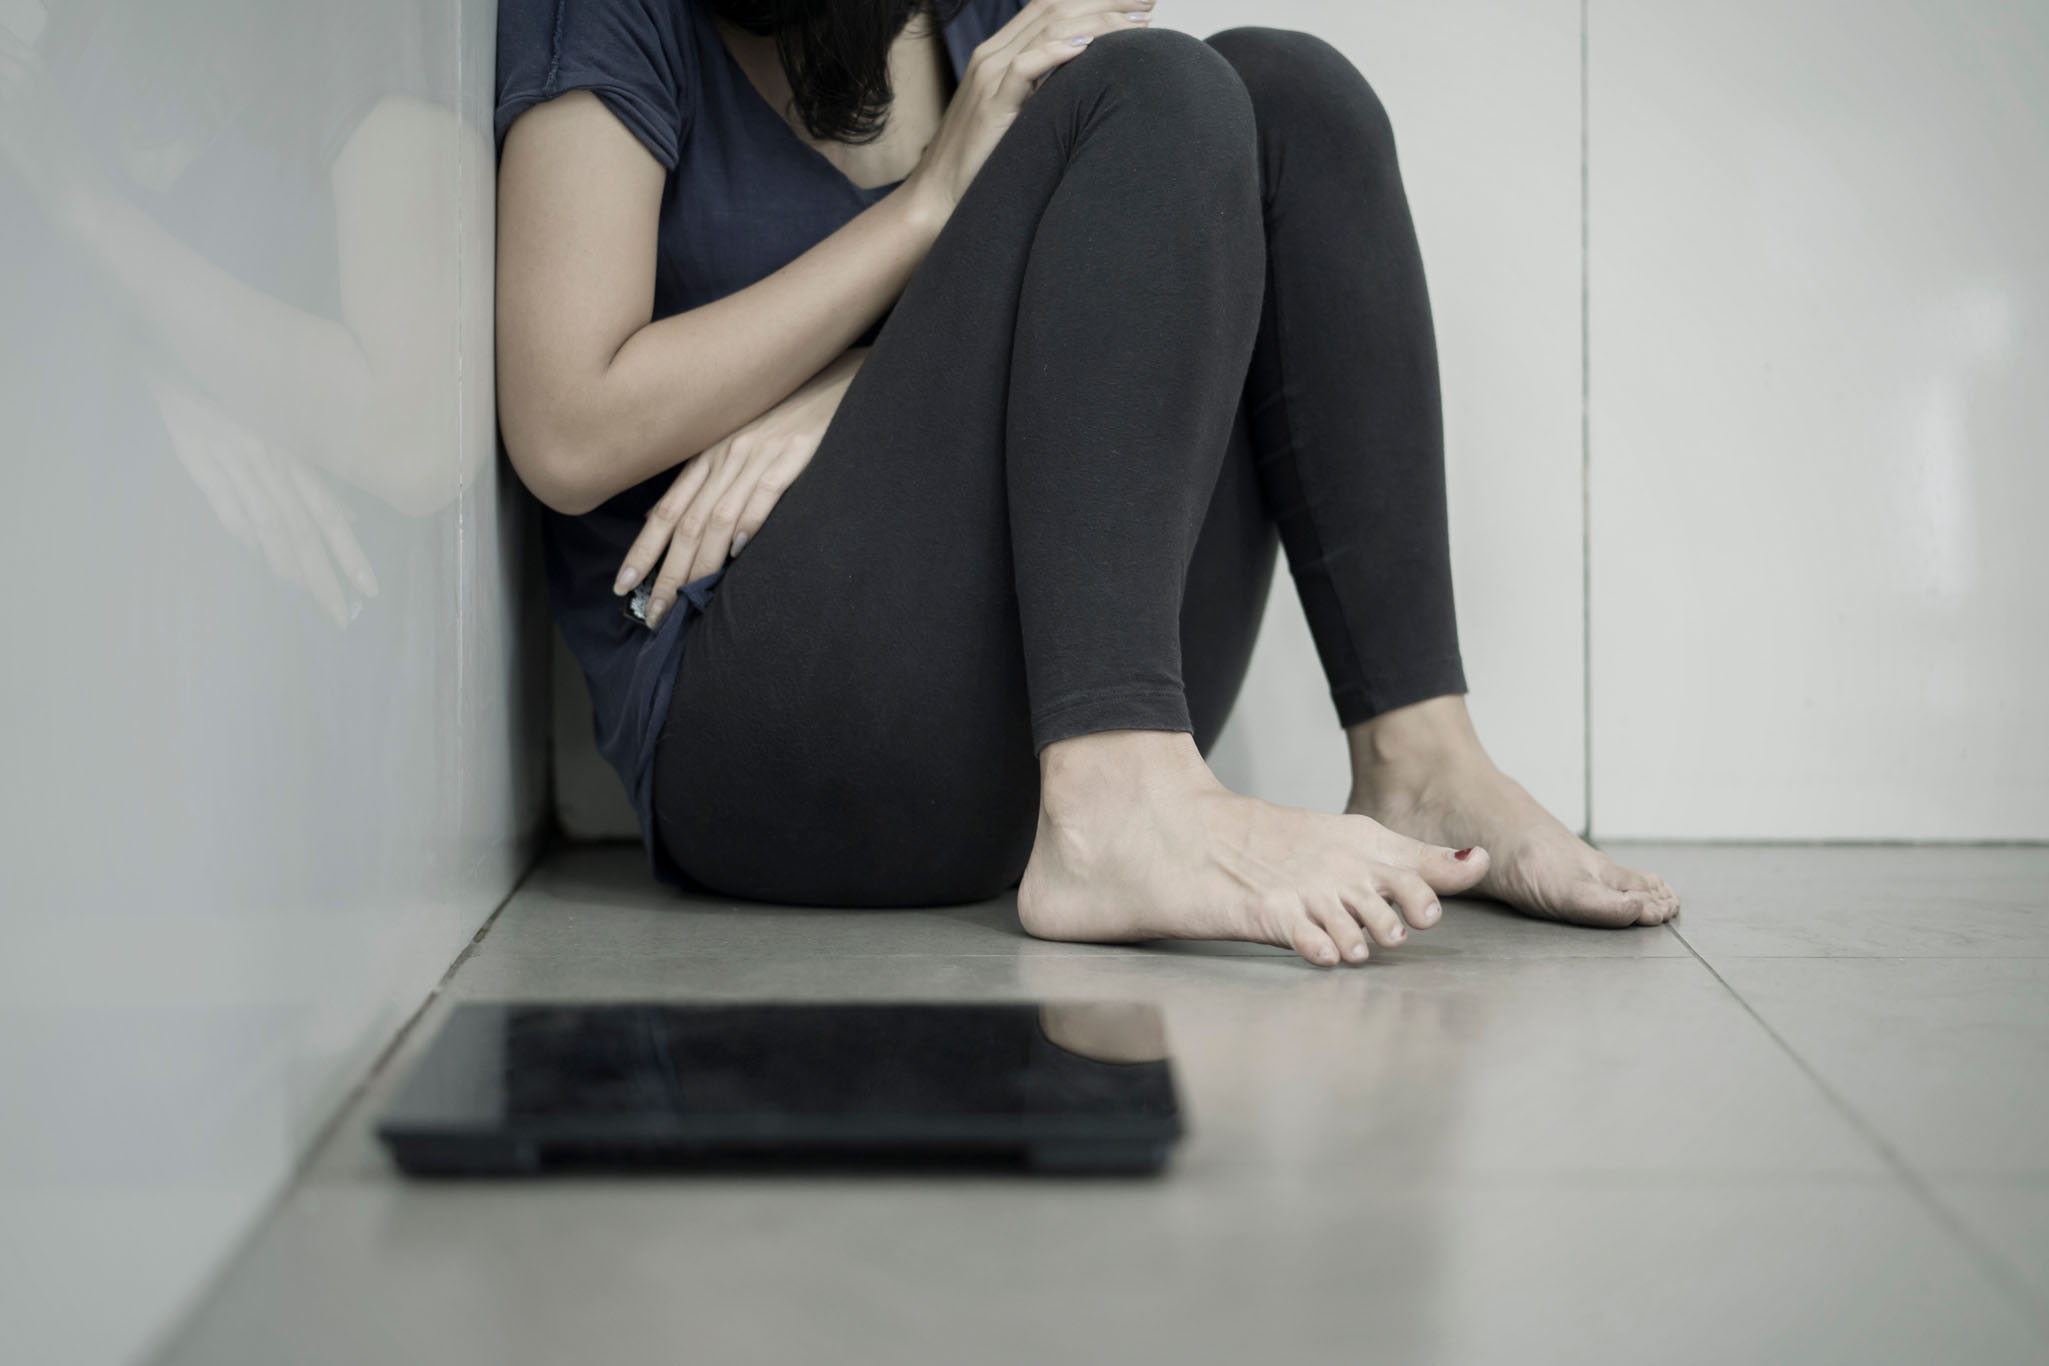 Can Depression Cause Eating Disorders? 